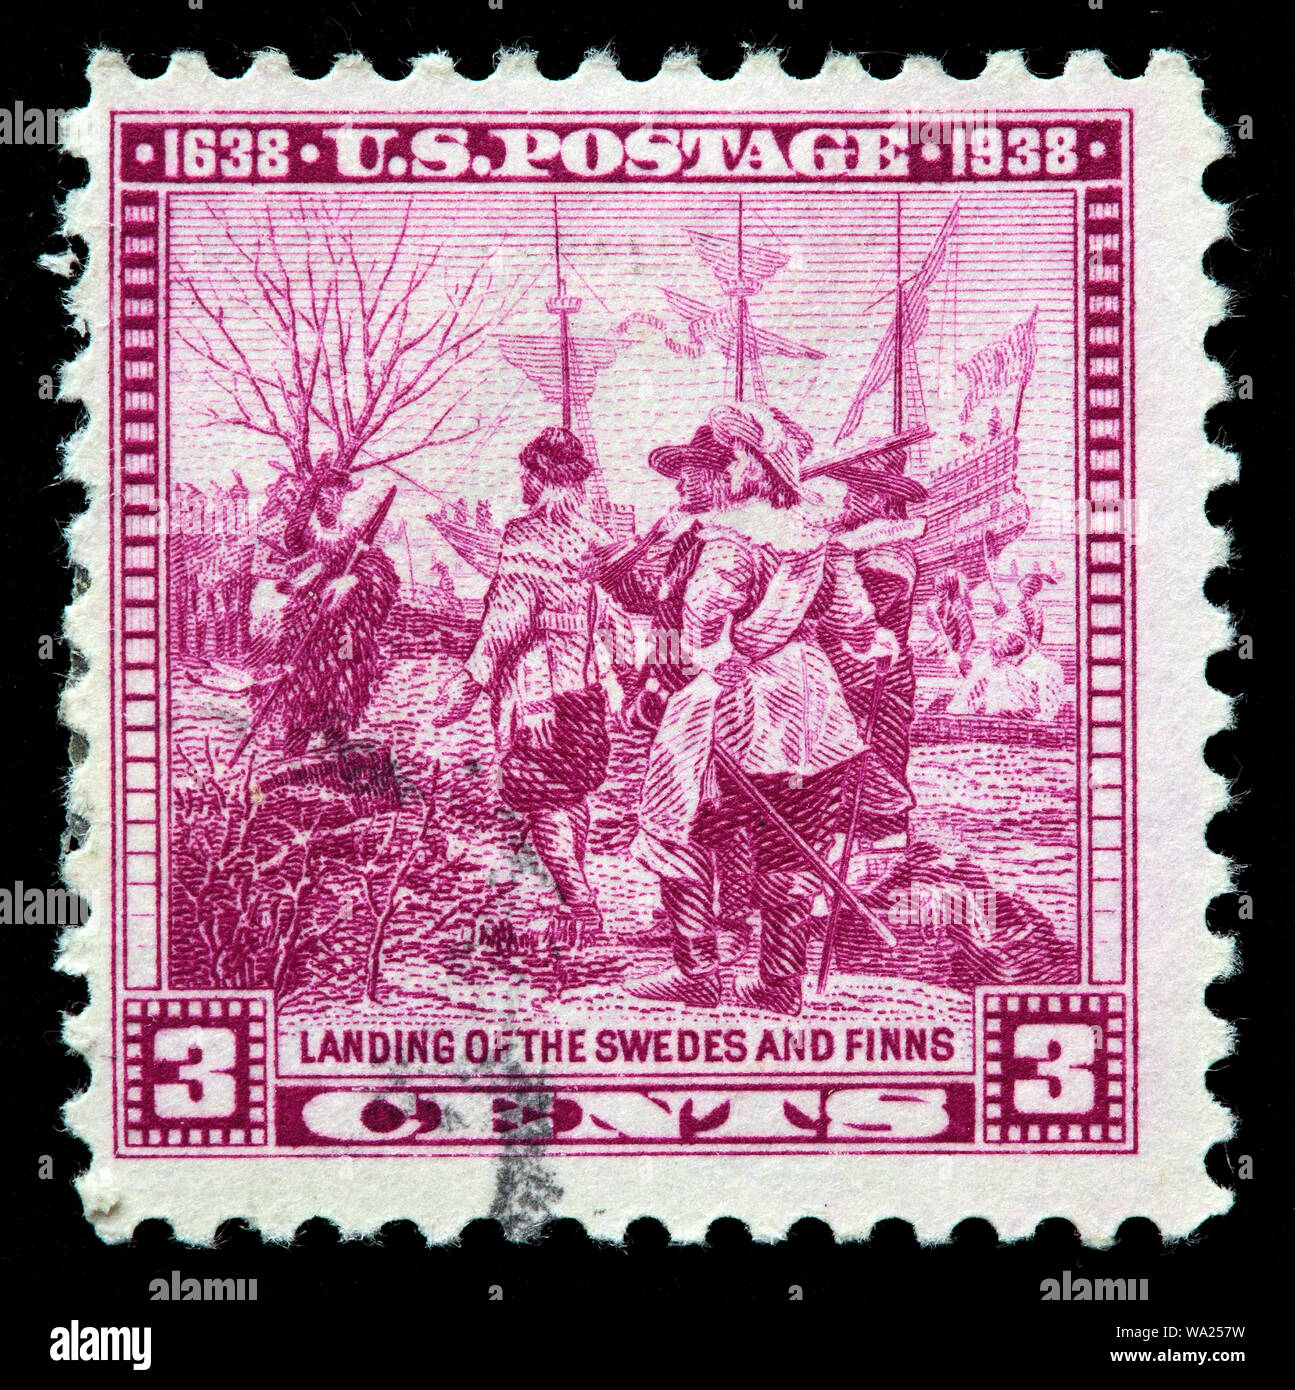 Landing of the First Swedes and Finns in America, postage stamp, USA, 1938 Stock Photo